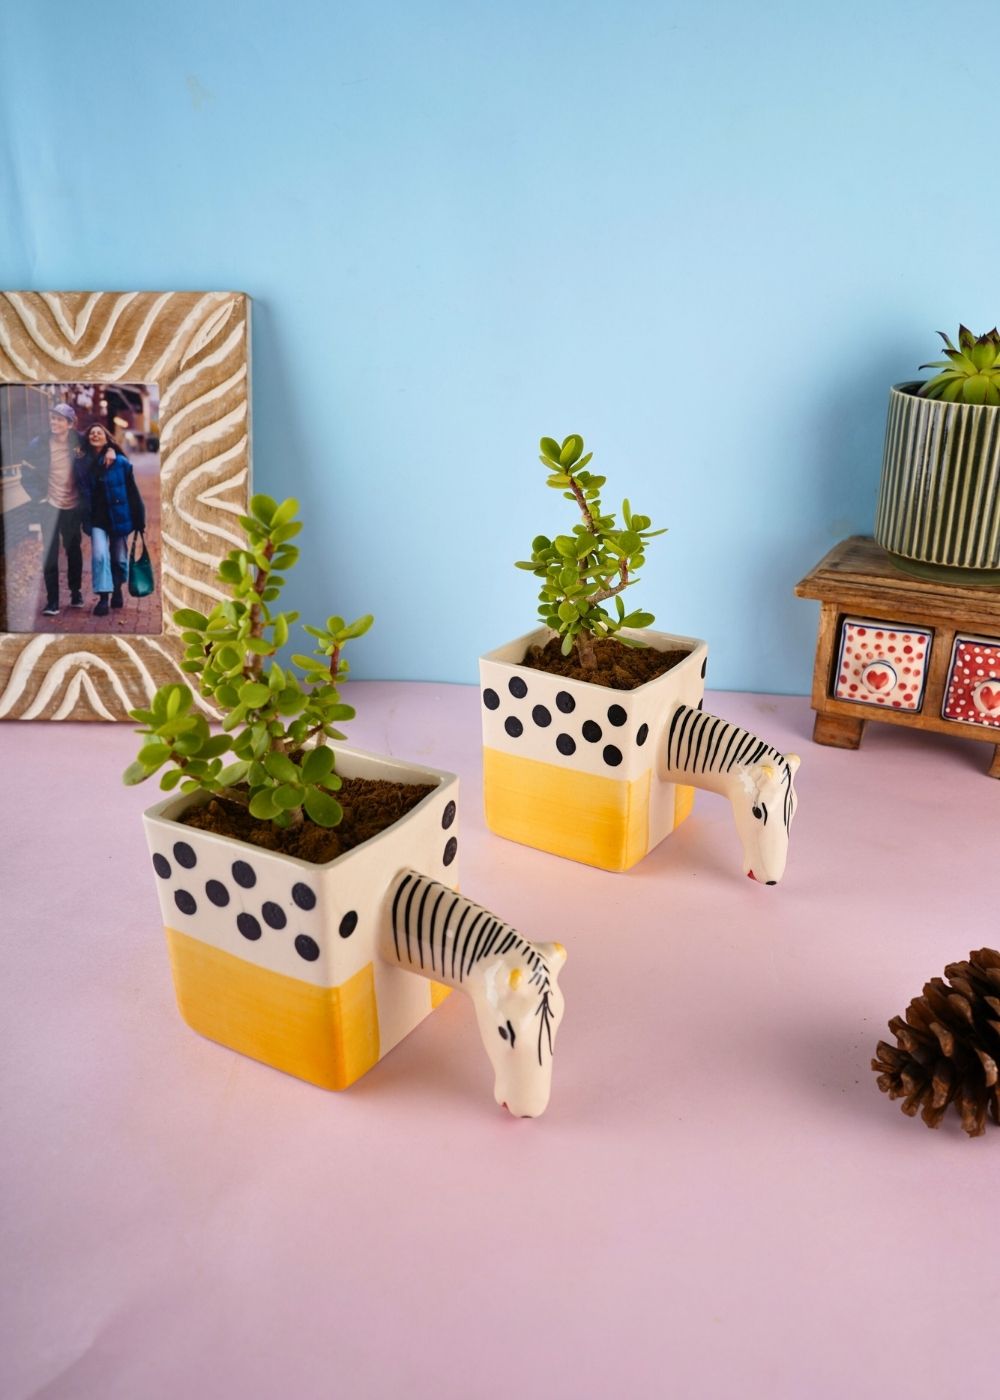 quirky horse planter with cute horse design